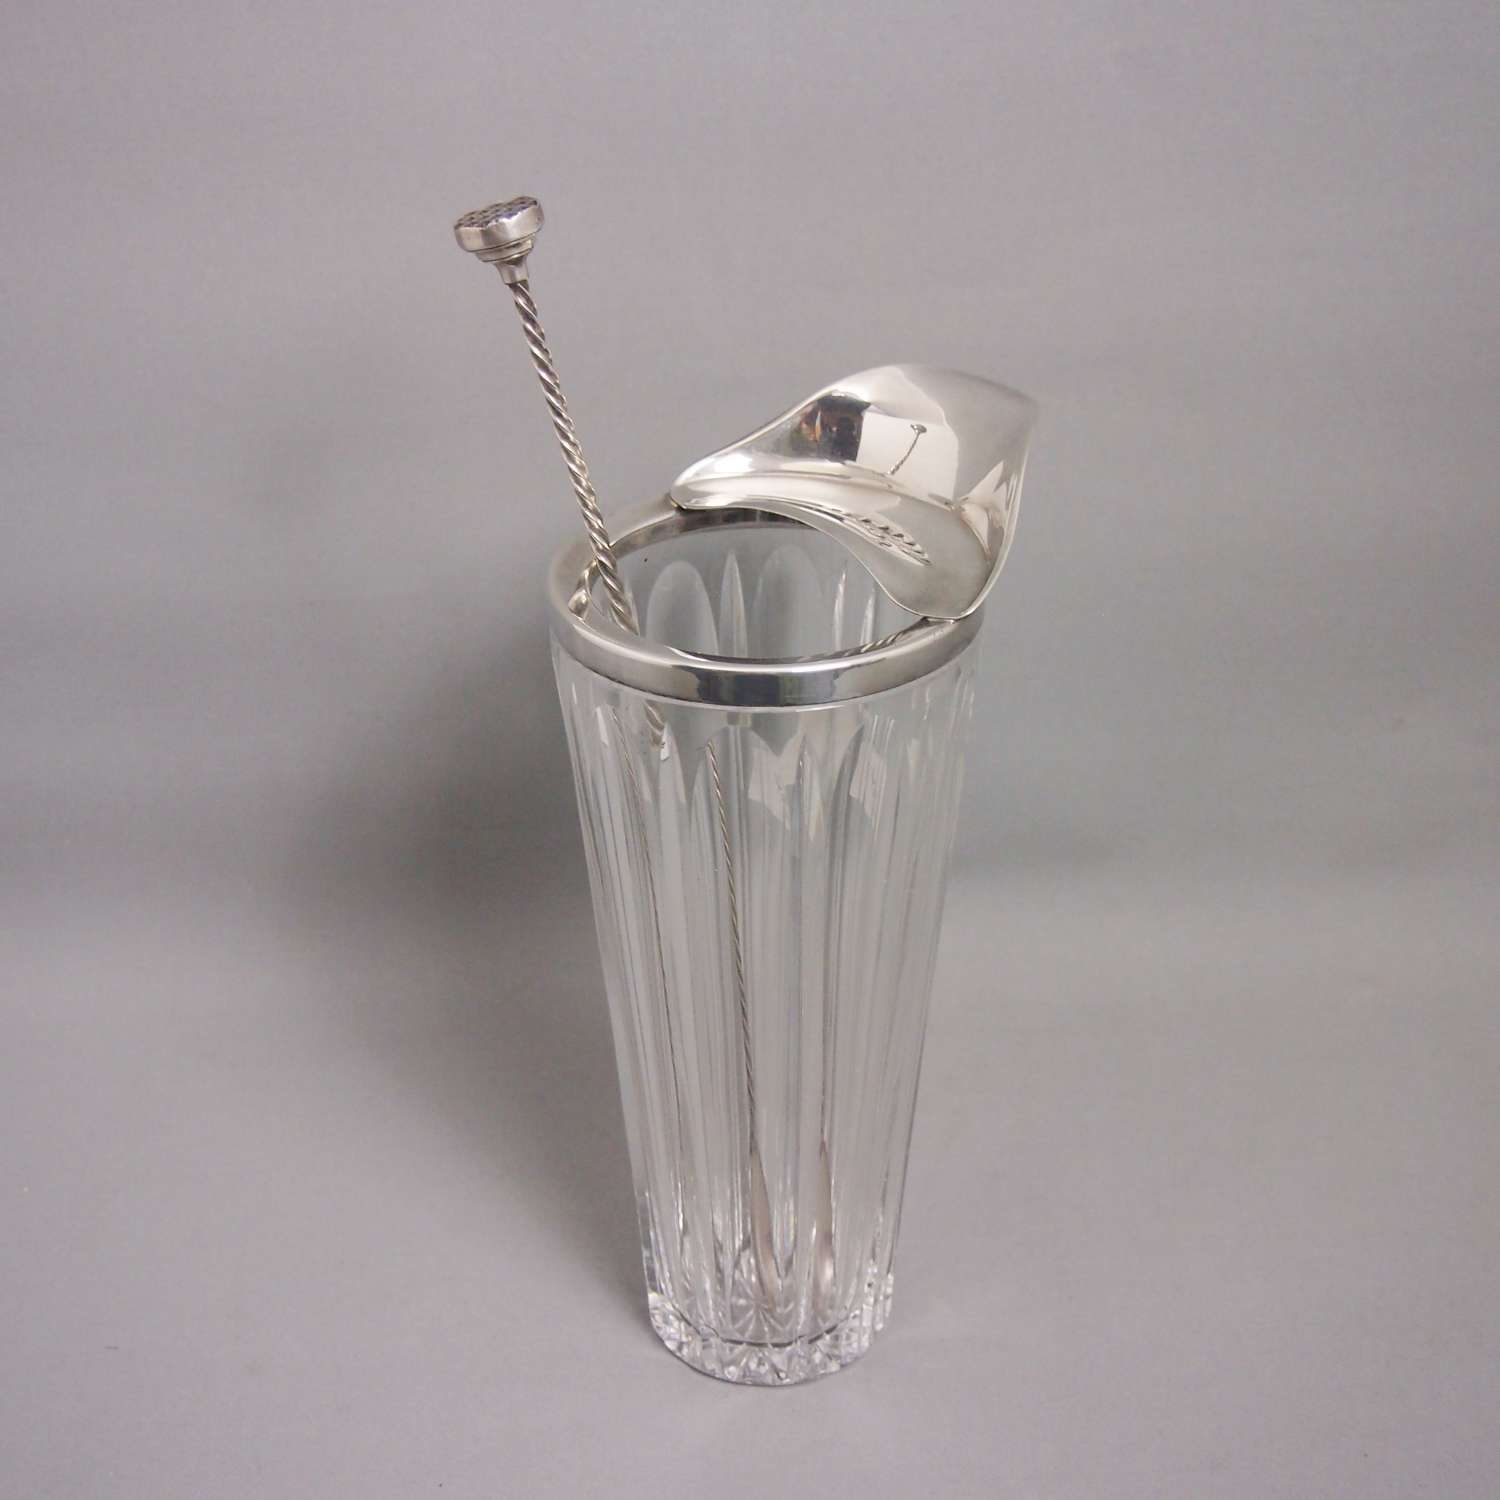 French Vintage Silver Plate & Glass Cocktail Mixer Jug. W8646